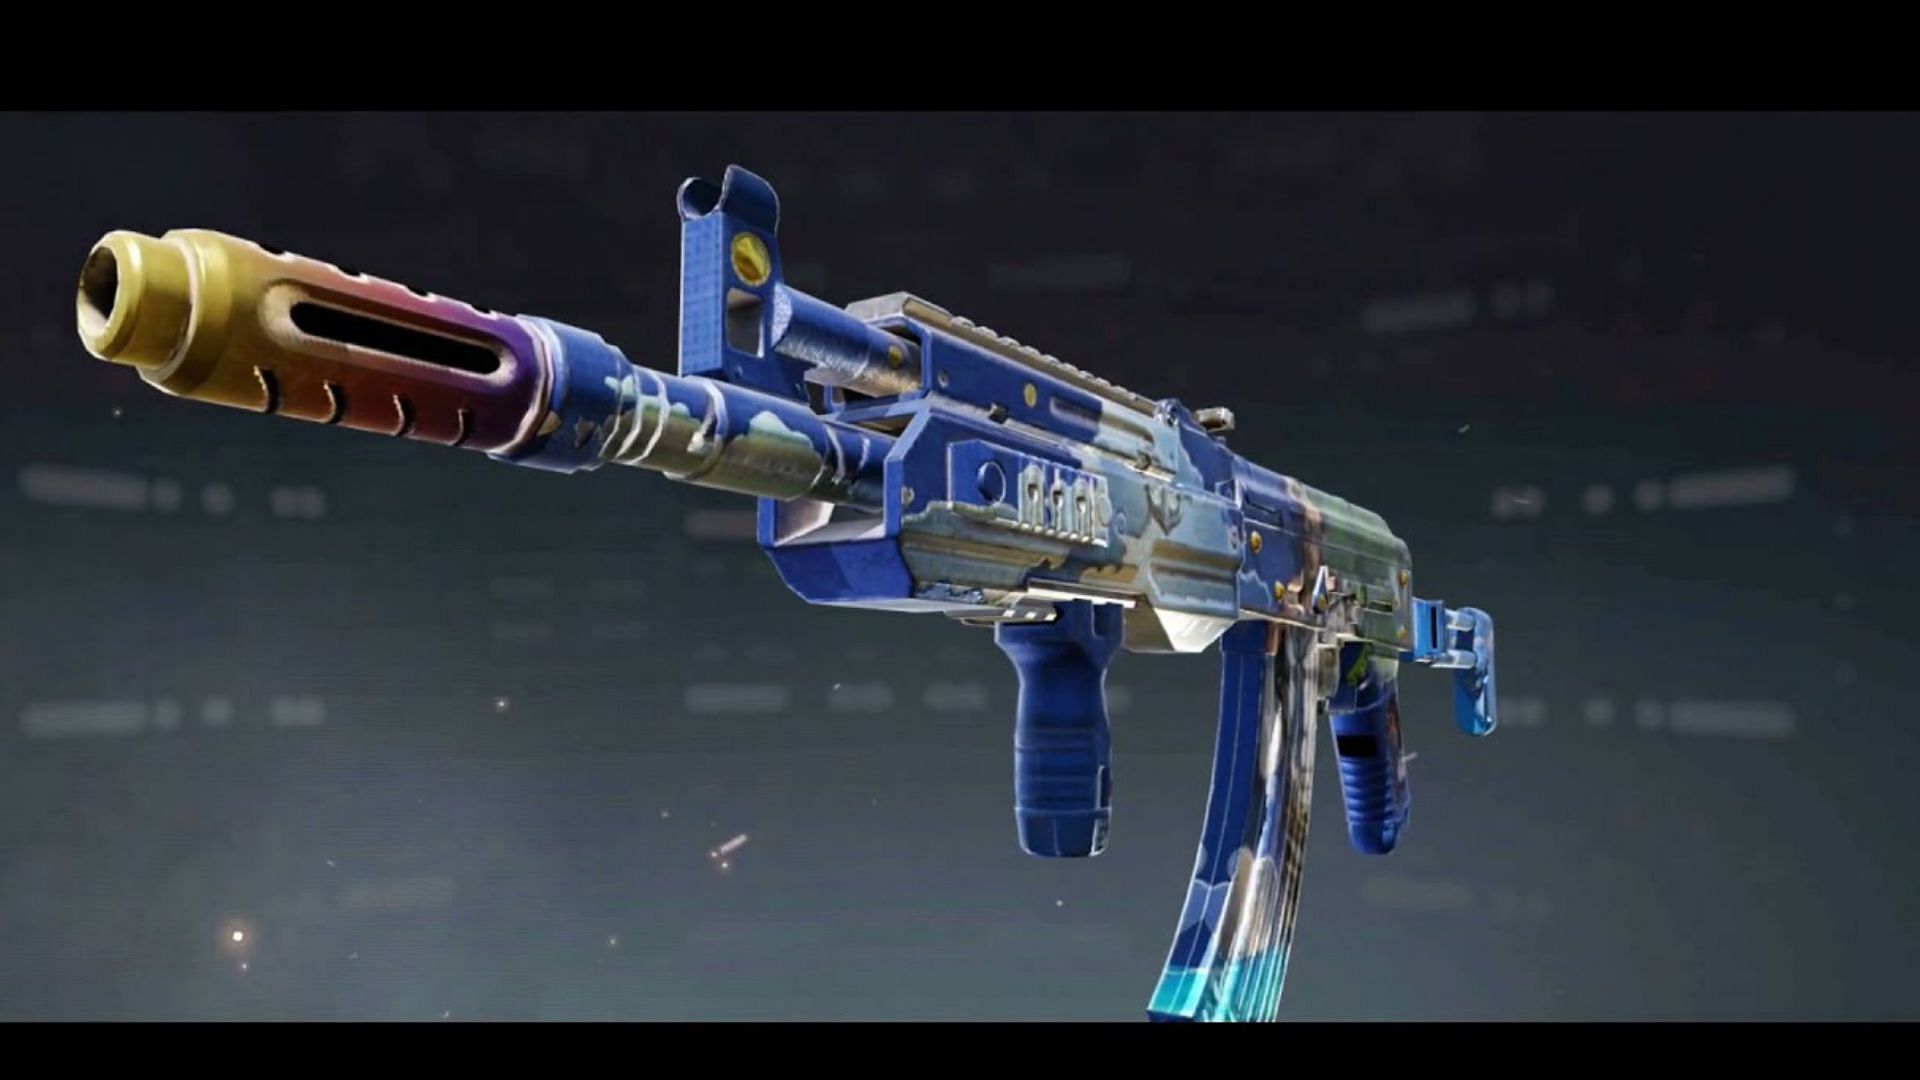 AK-47 is getting a mythic skin next season in COD Mobile, and leaks have provided a first look at upcoming skin (Image via Call of Duty Mobile)